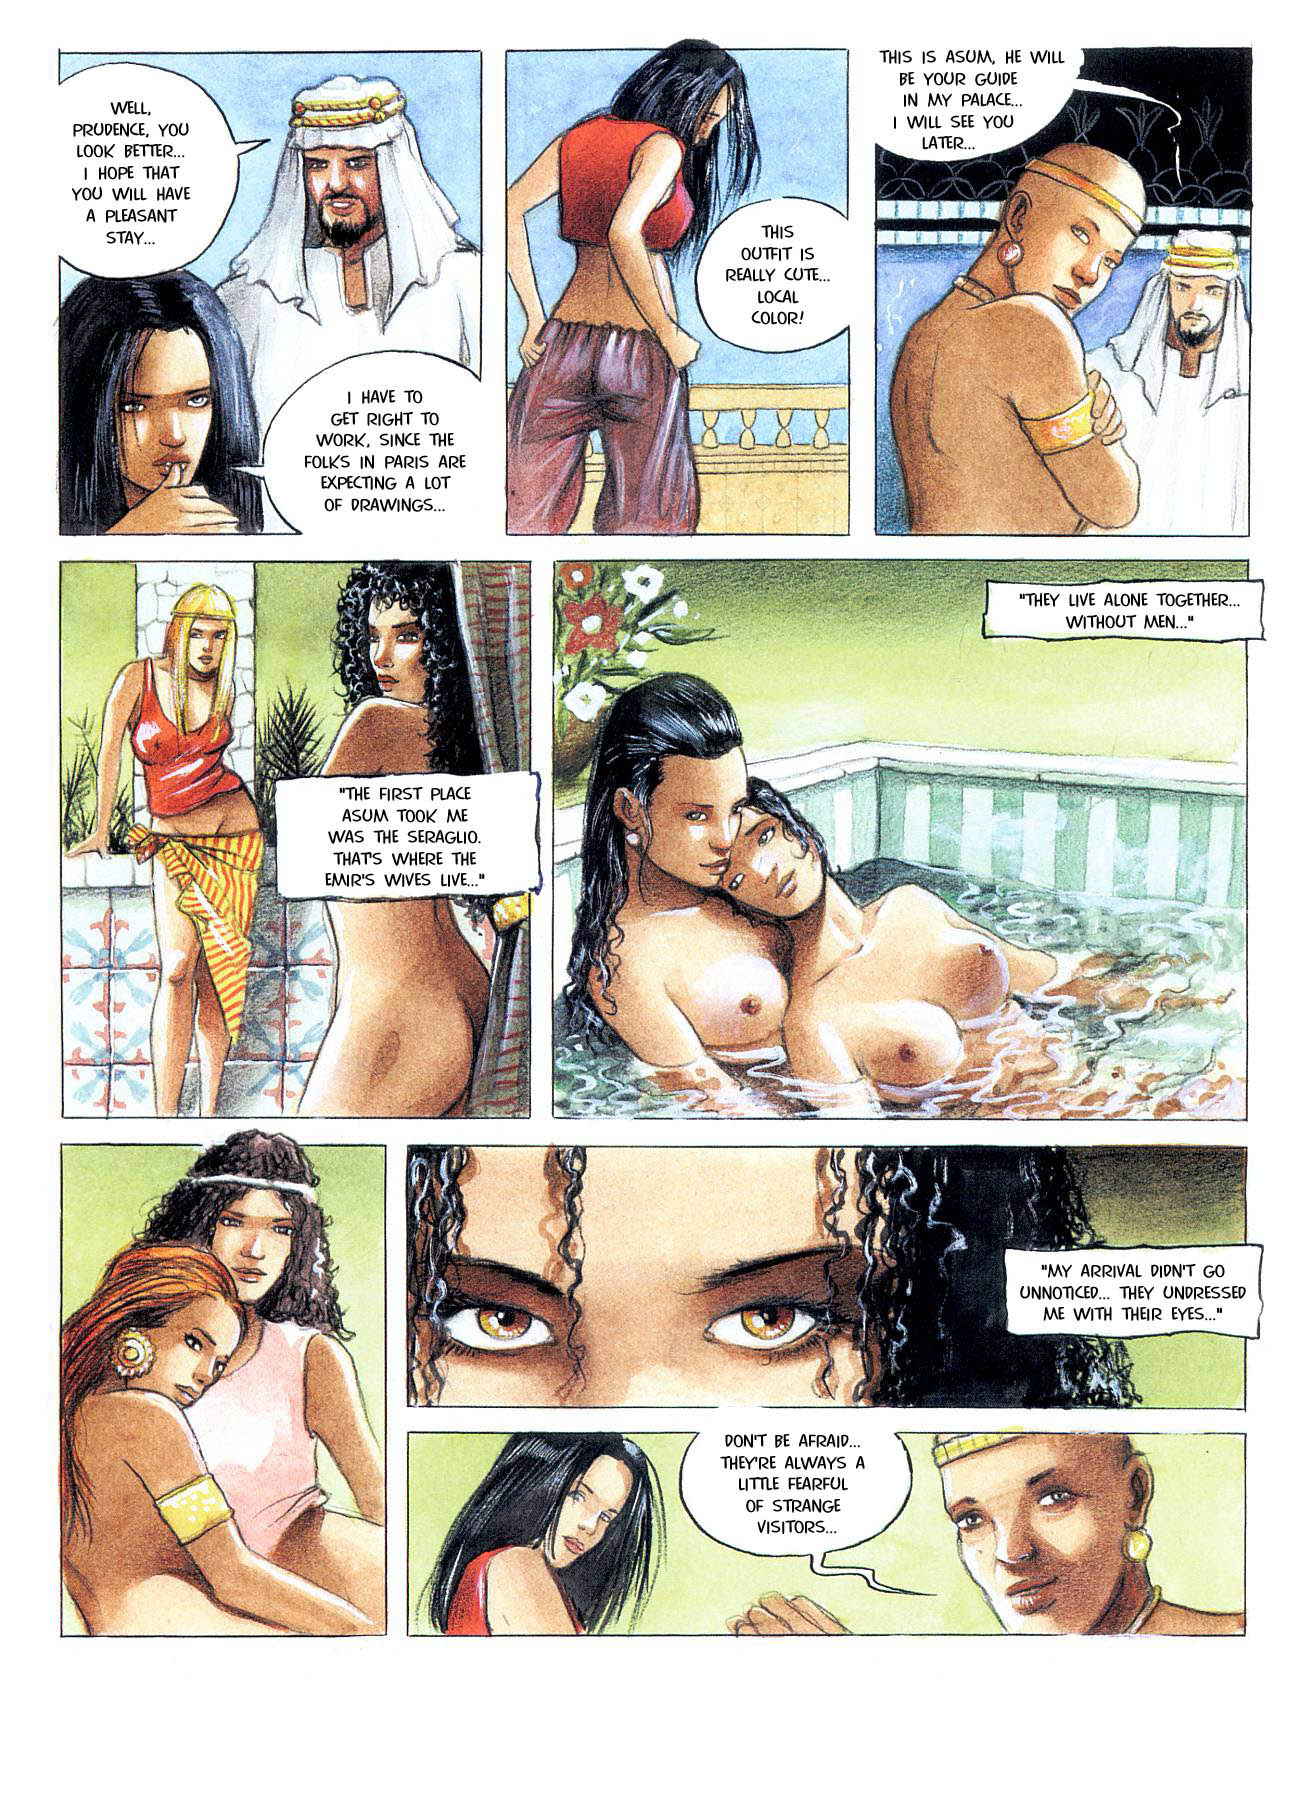 Lubrix Prudence page 20